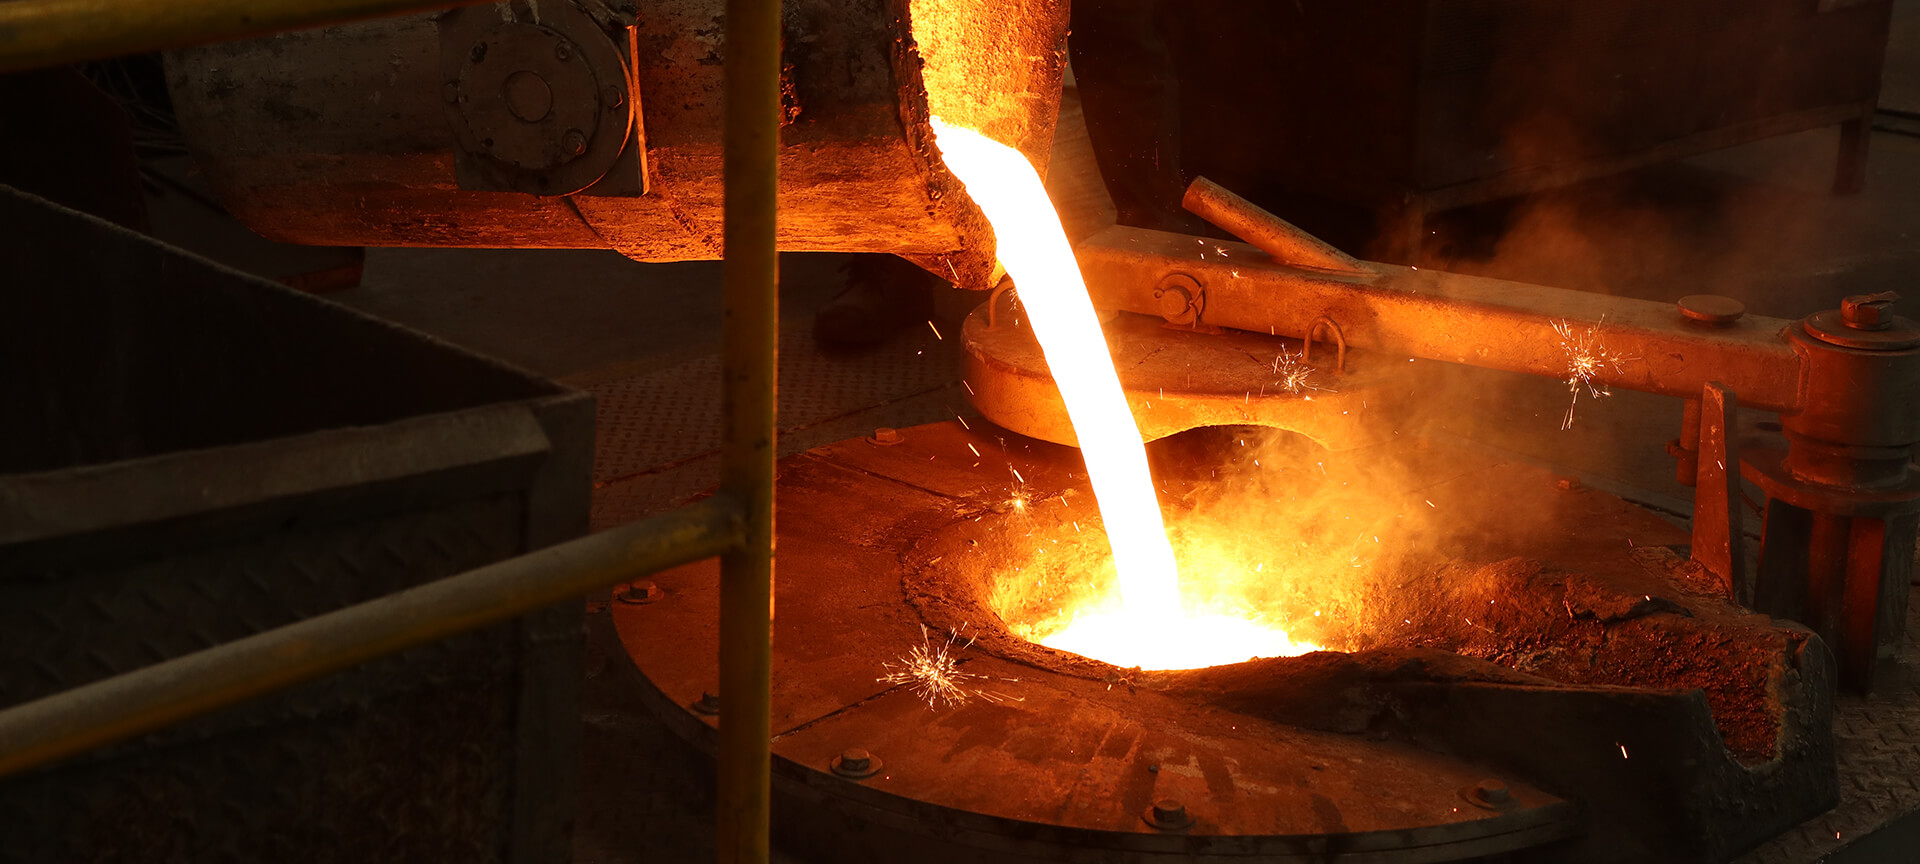 Investment Casting Market Size 2021 with Covid 19 Impact Analysis includes Top Countries Data, Defination, SWOT Analysis, Business Opportunity, Applications, Trends and Forecast to 2024